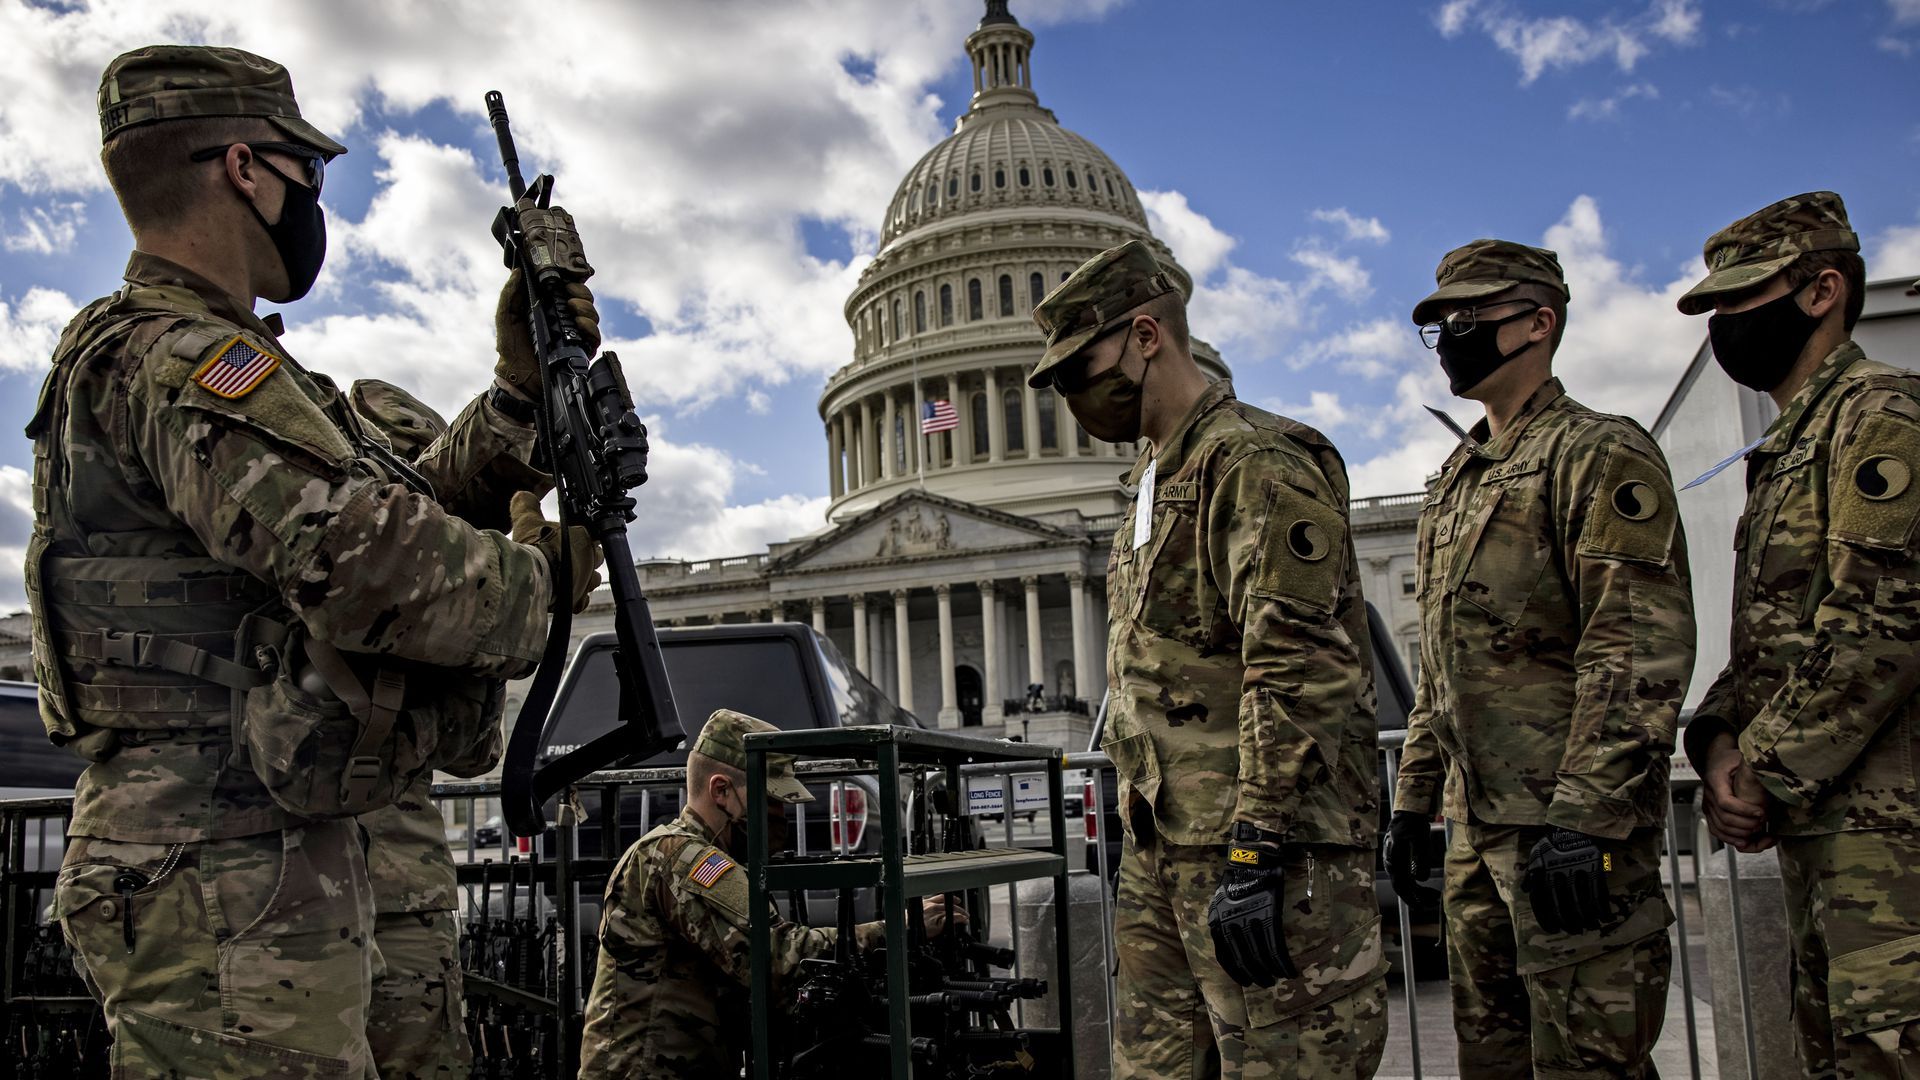 Virginia National Guard soldiers are issued their M4 rifles and live ammunition on the east front of the U.S. Capitol on Jan. 17.